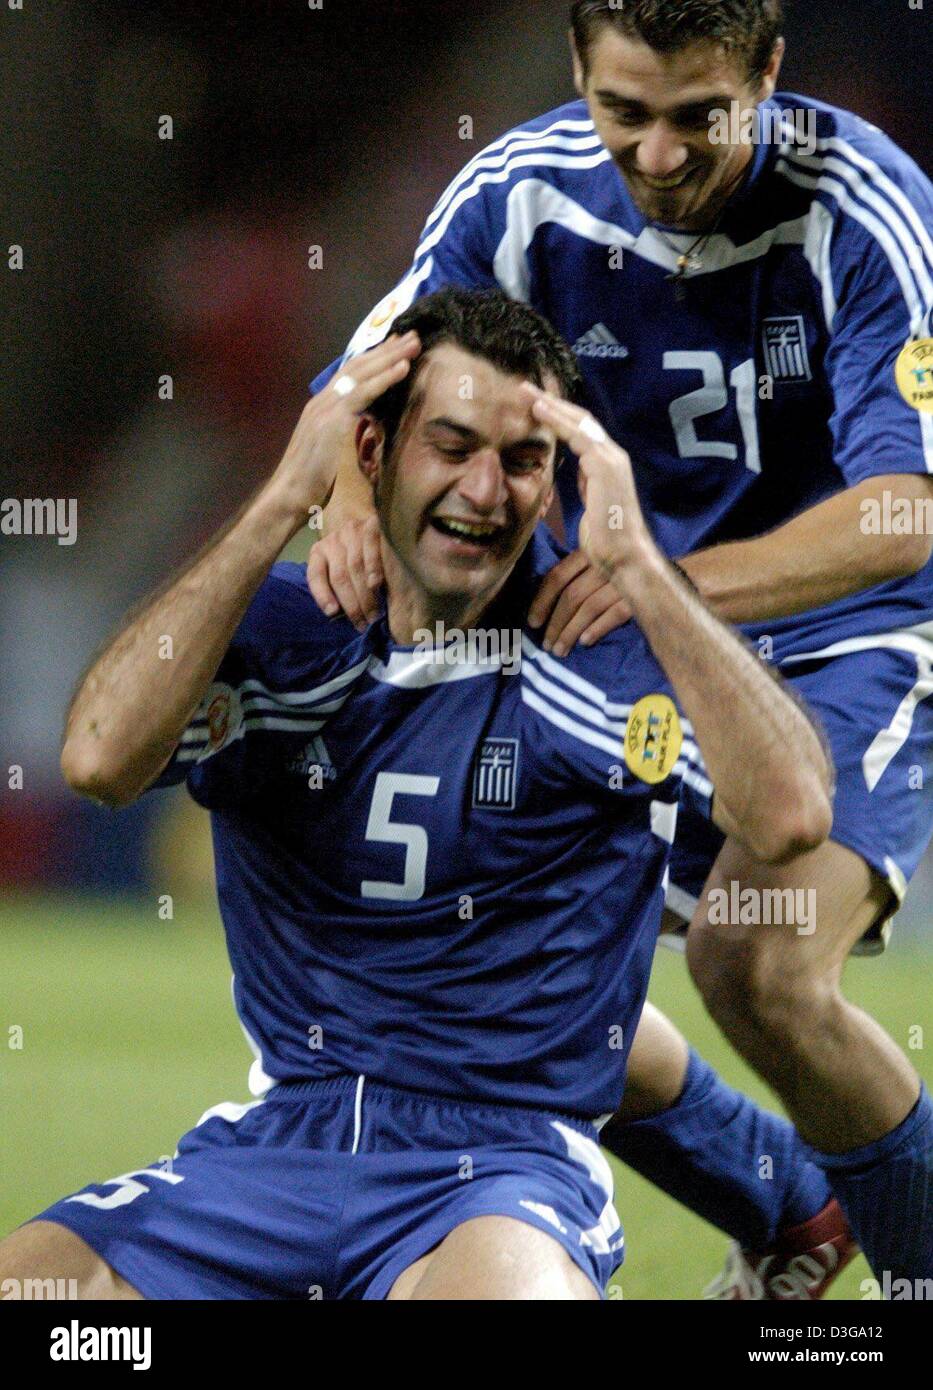 (dpa) - Greek defender Traianos Dellas (no 5) kneels on the pitch and cheers while being congratulated by his teammate Konstantinos Katsouranis after scoring the winning 1-0 silver goal during the Soccer Euro 2004 semifinal opposing Greece and the Czech Republic  in Porto, Portugal, 1 July 2004. Greece scored the goal during extra time in the 105th minute of the game and qualified  Stock Photo